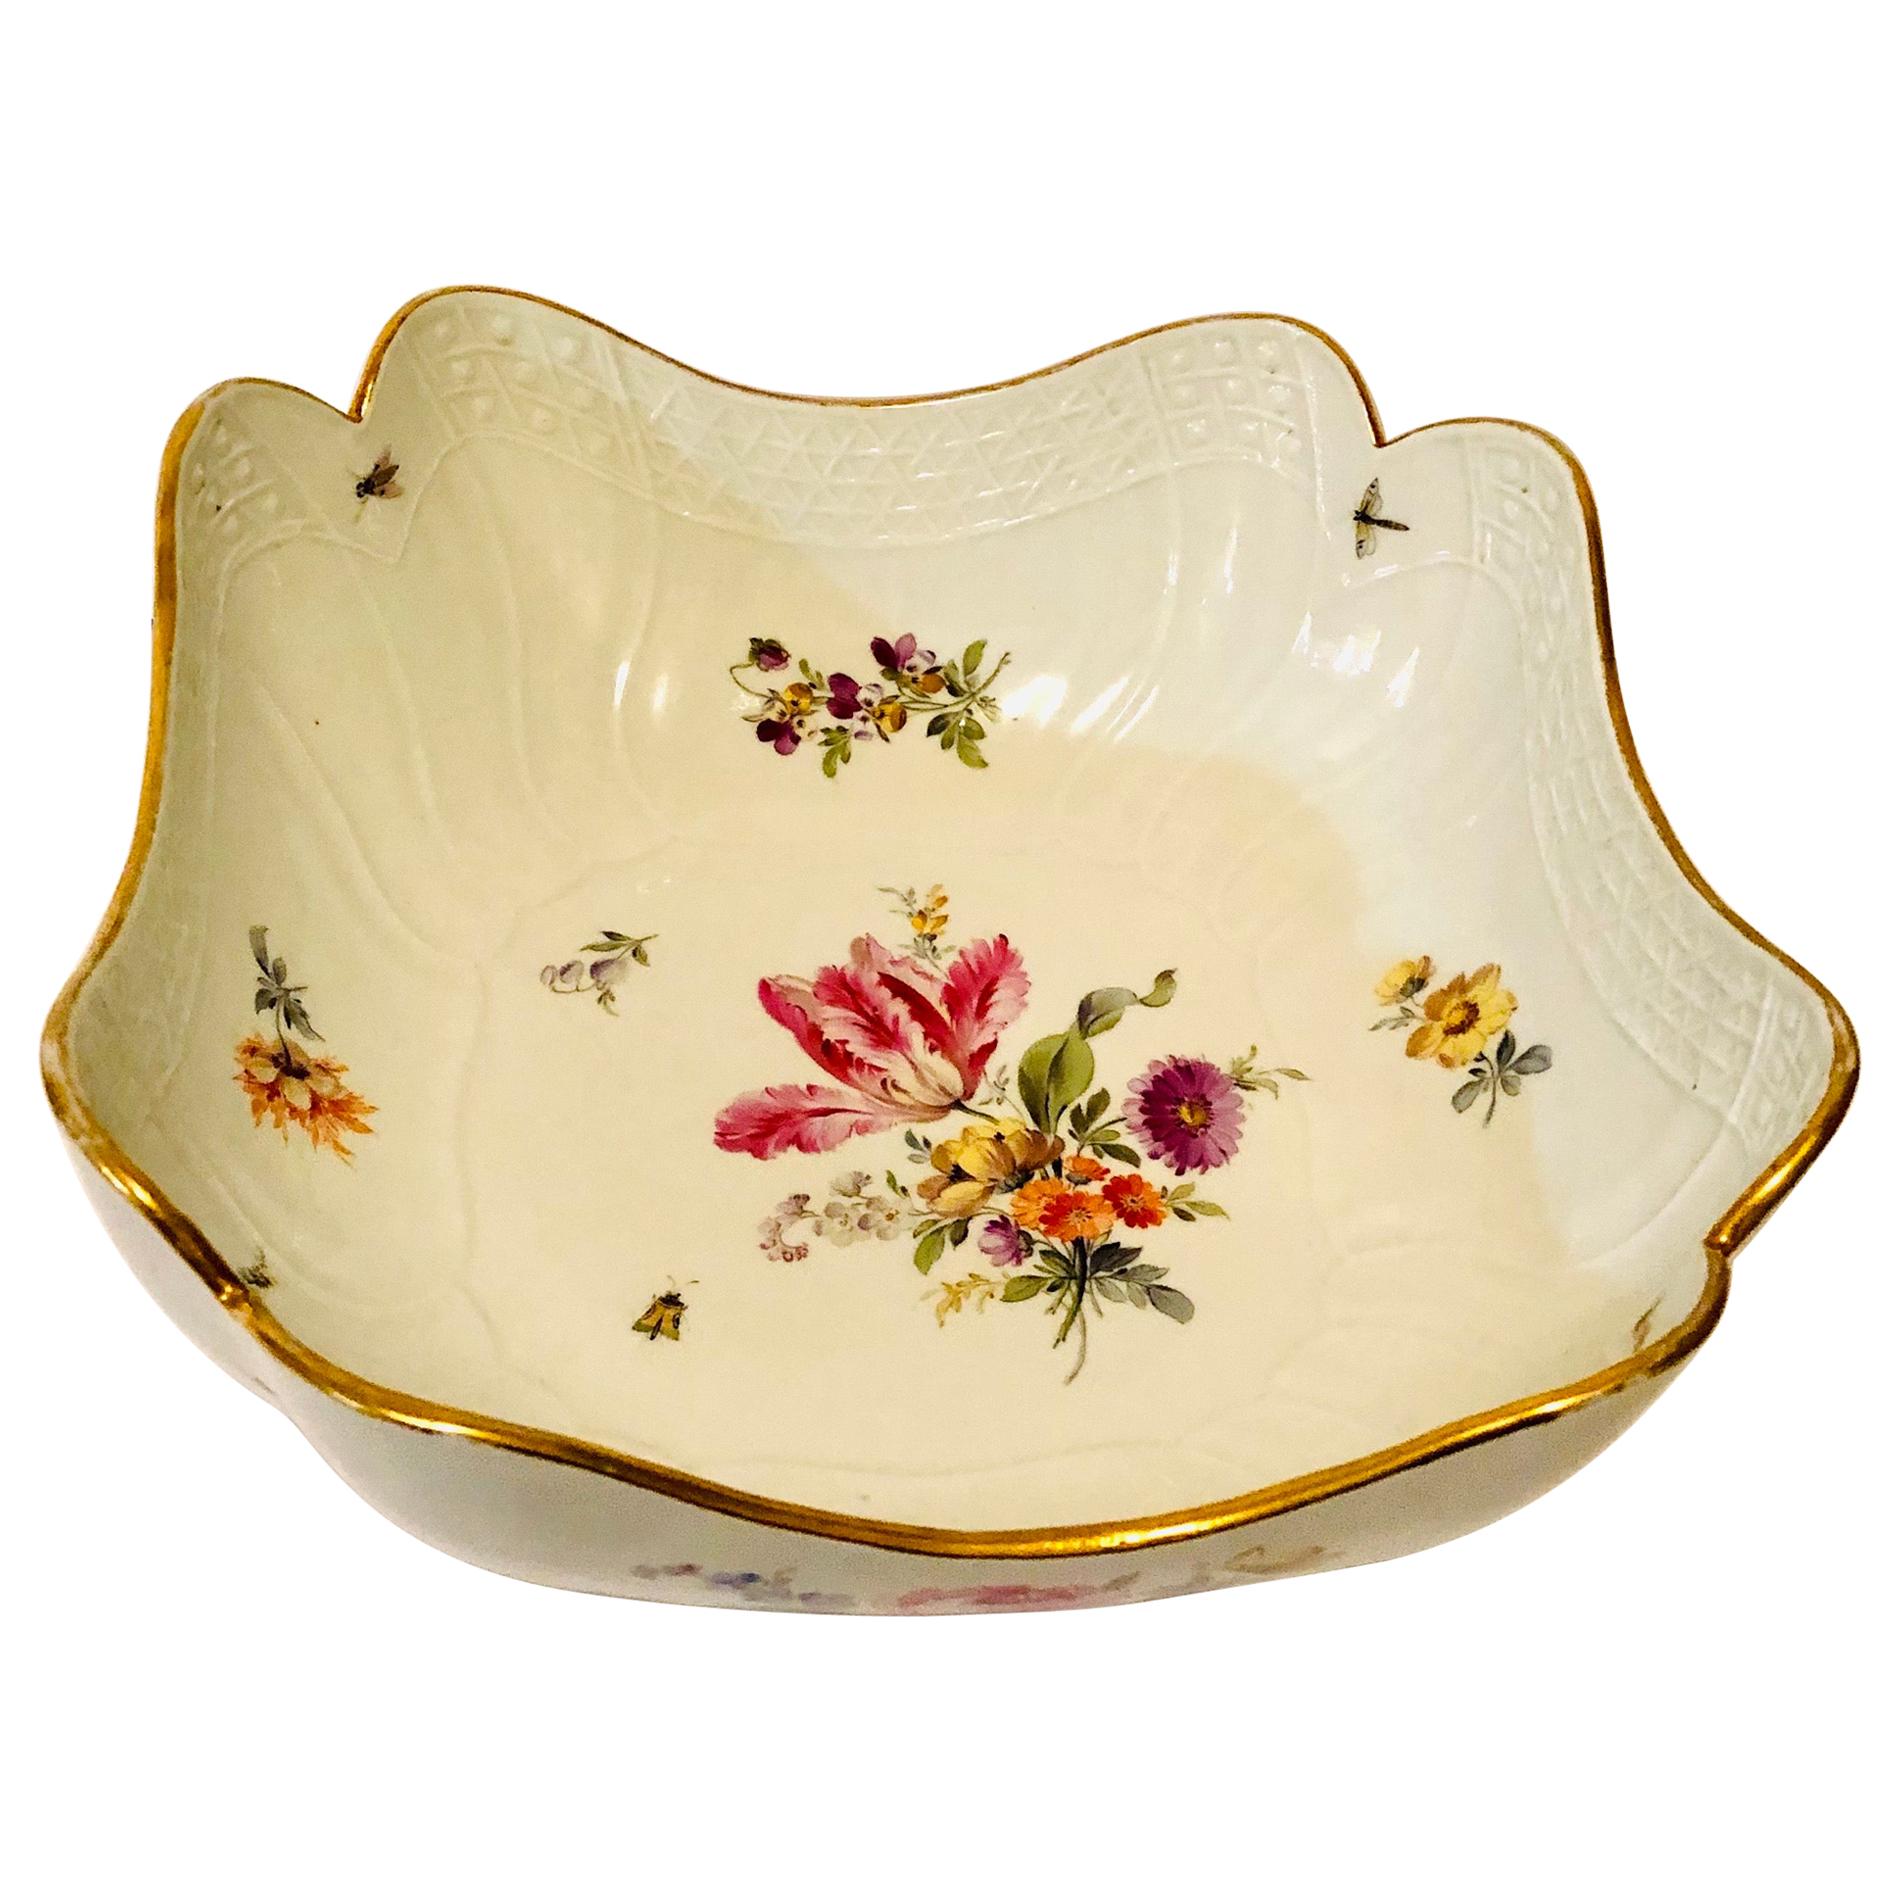 Meissen Four Cornered Deep Serving Bowl from the 1880s with Five Flower Bouquets